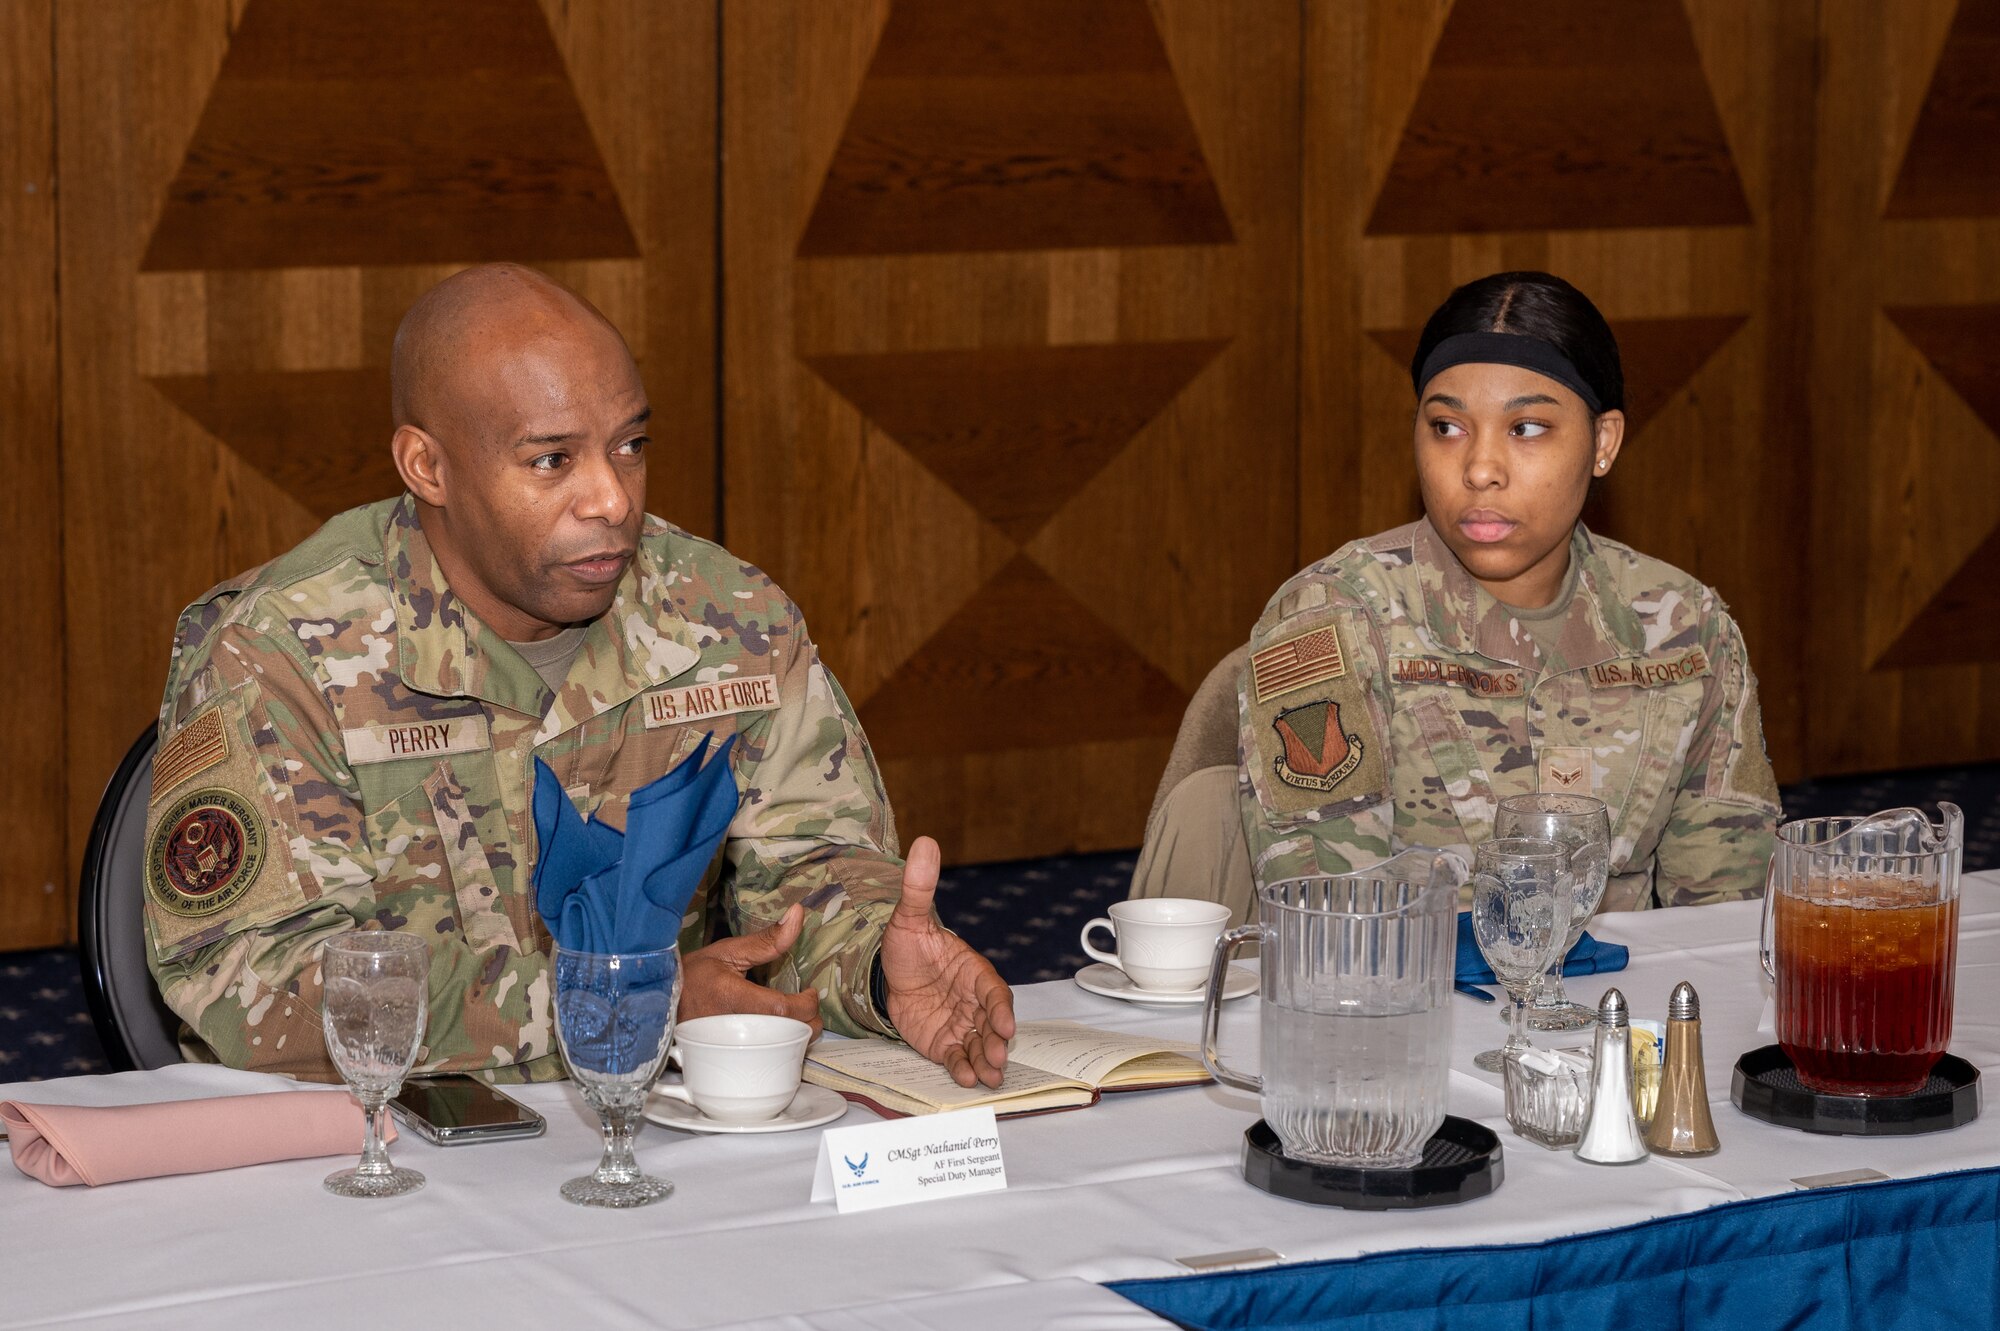 Two military members sitting at a table.